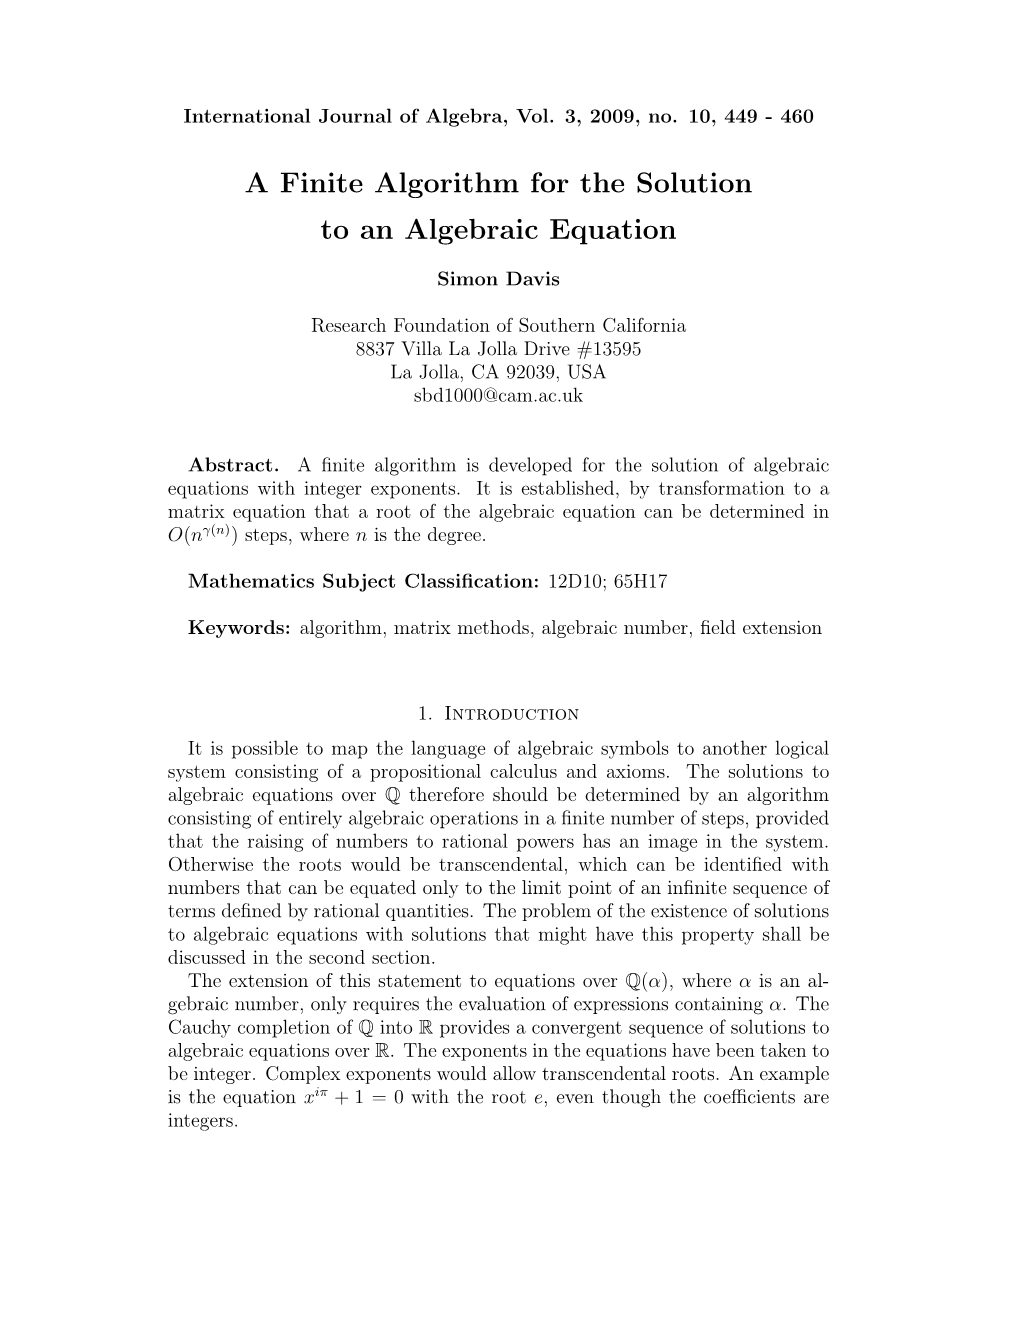 A Finite Algorithm for the Solution to an Algebraic Equation